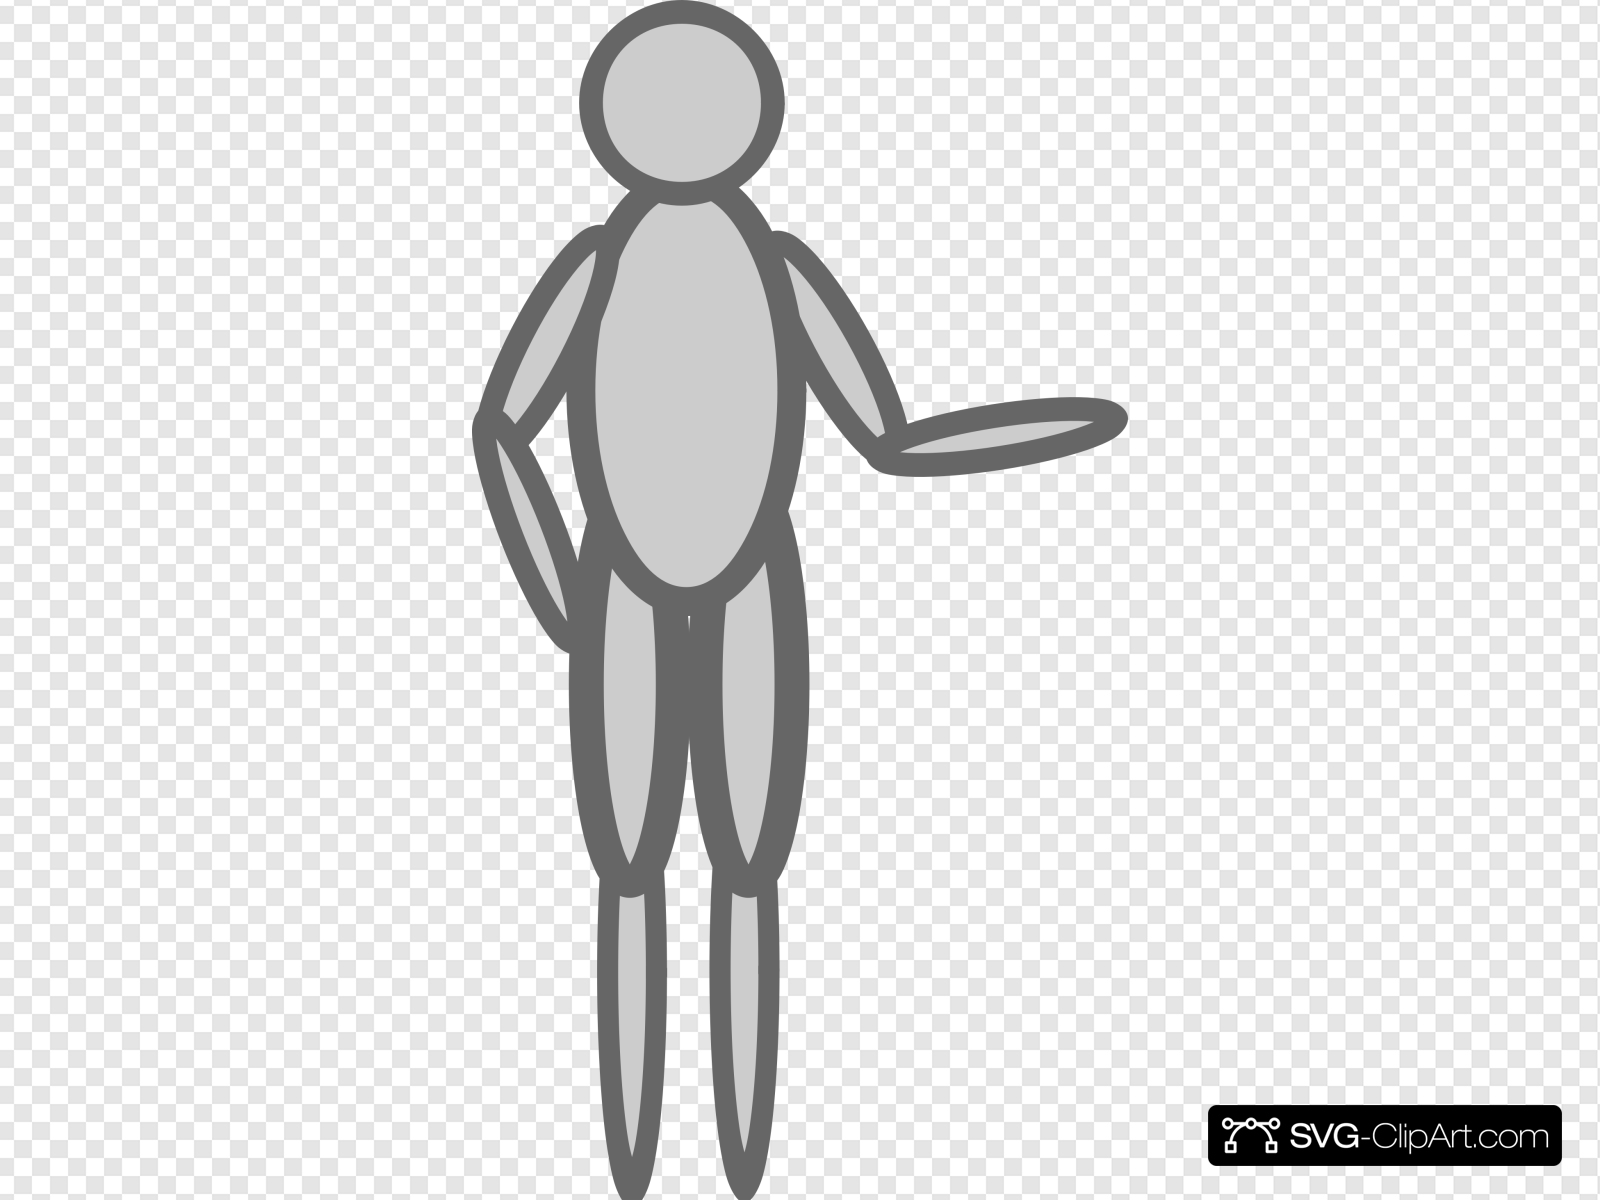 Person With Hands Down Clip art, Icon and SVG.